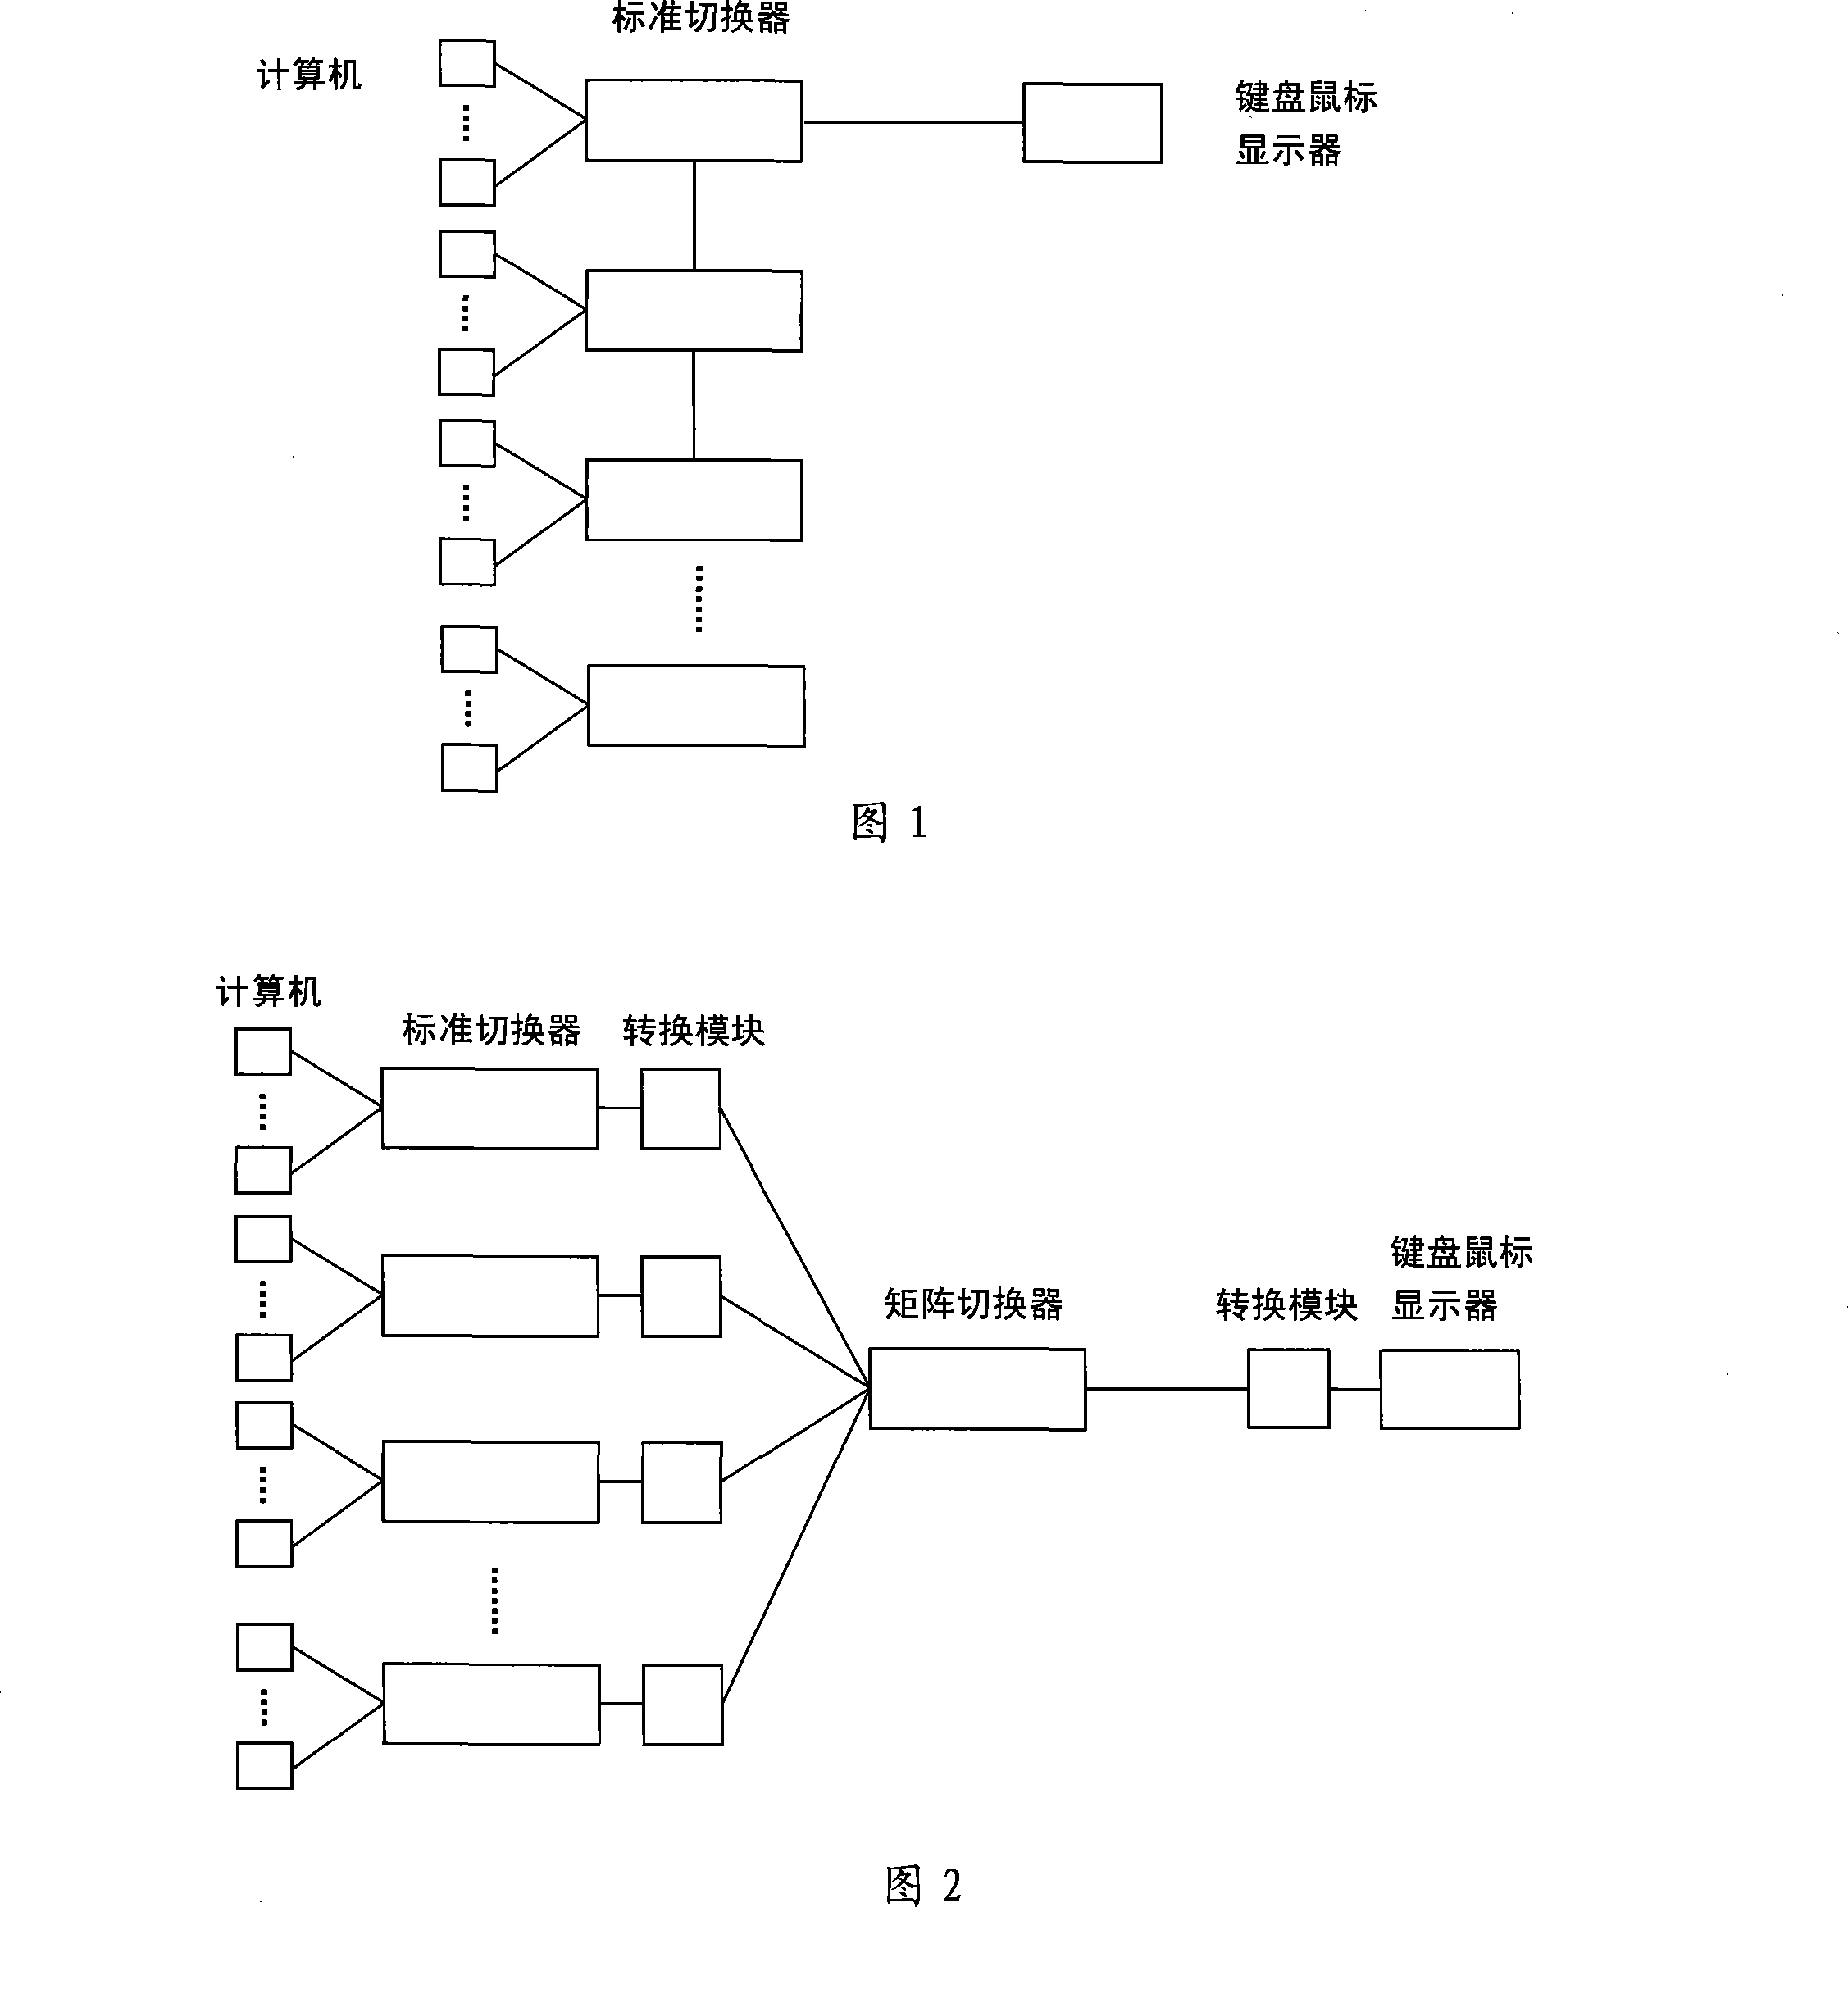 Method for implementing high-available switching device cascade connection